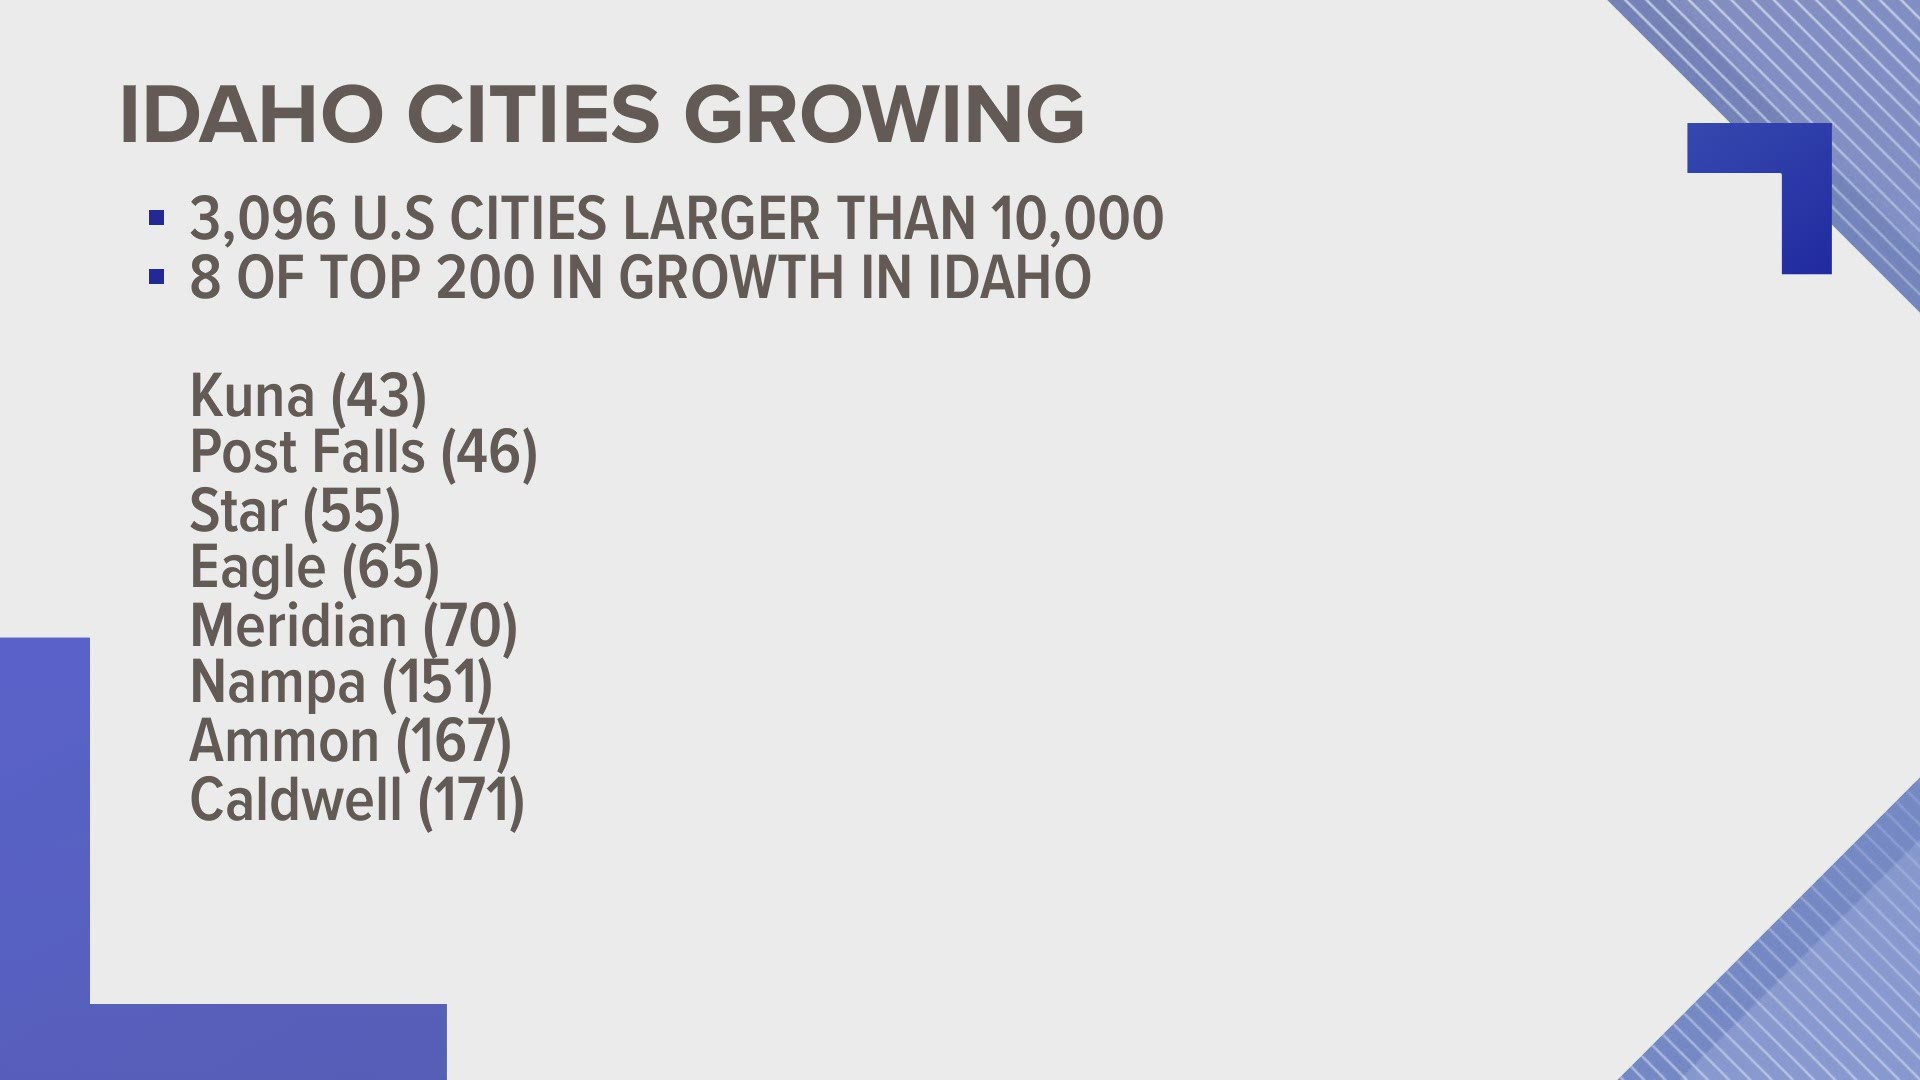 Approximately 70.5% of Idahoans lived in cities in 2020 compared to 61.2% in 1980, according to the Idaho Dept. of Labor.